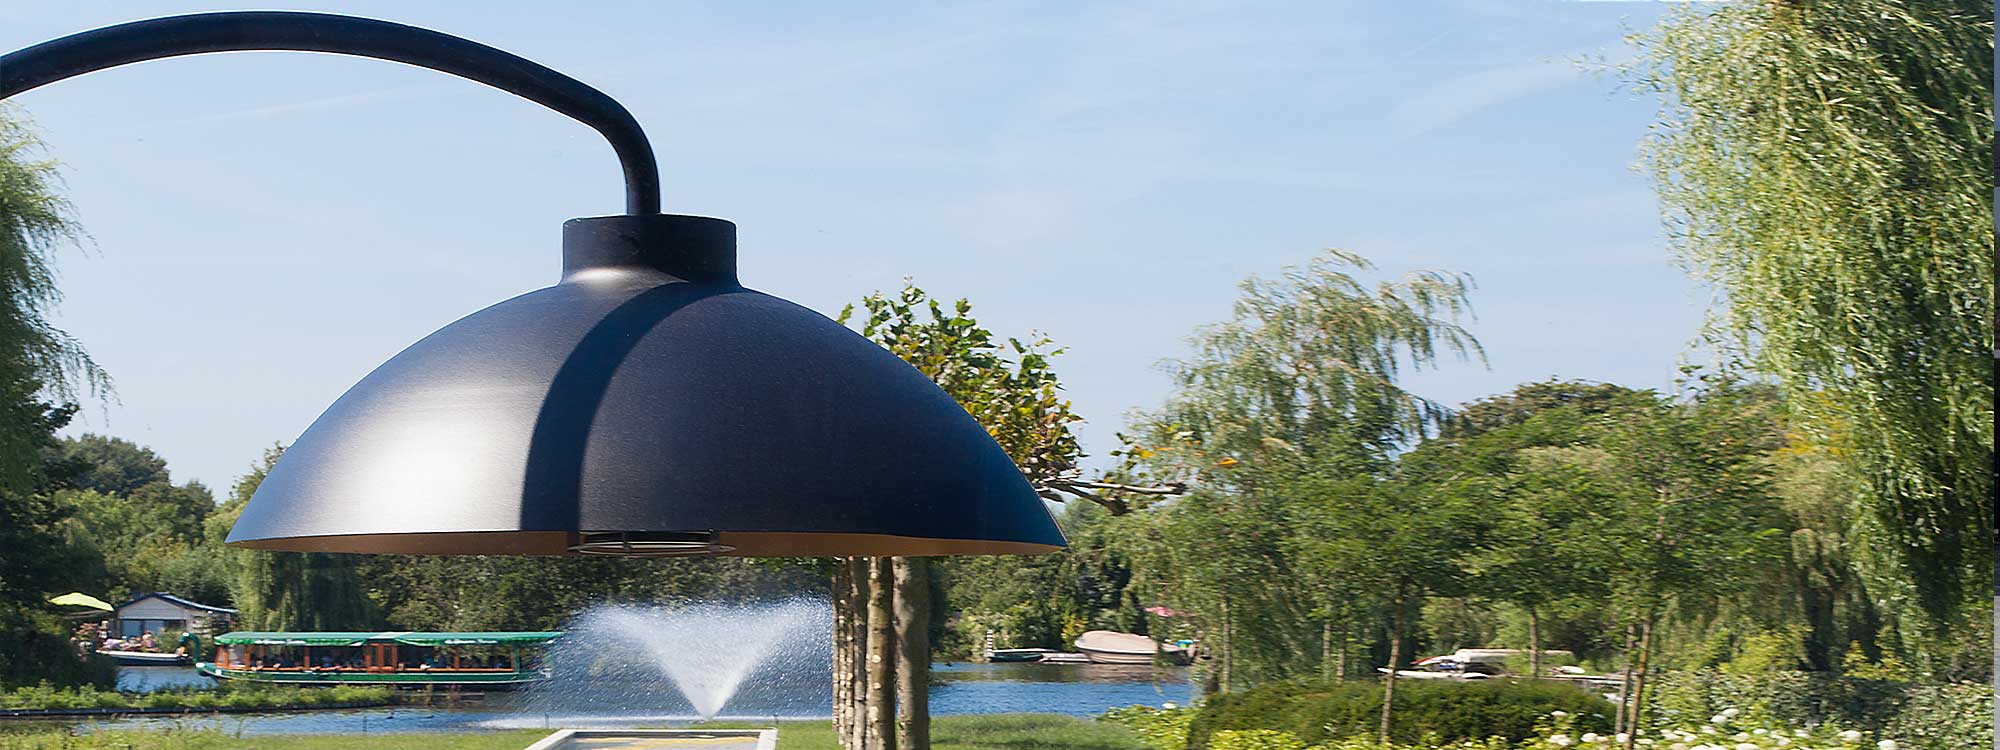 Image of black hood of Heatsail Dome heater on summer's day with canal boats and trees in background